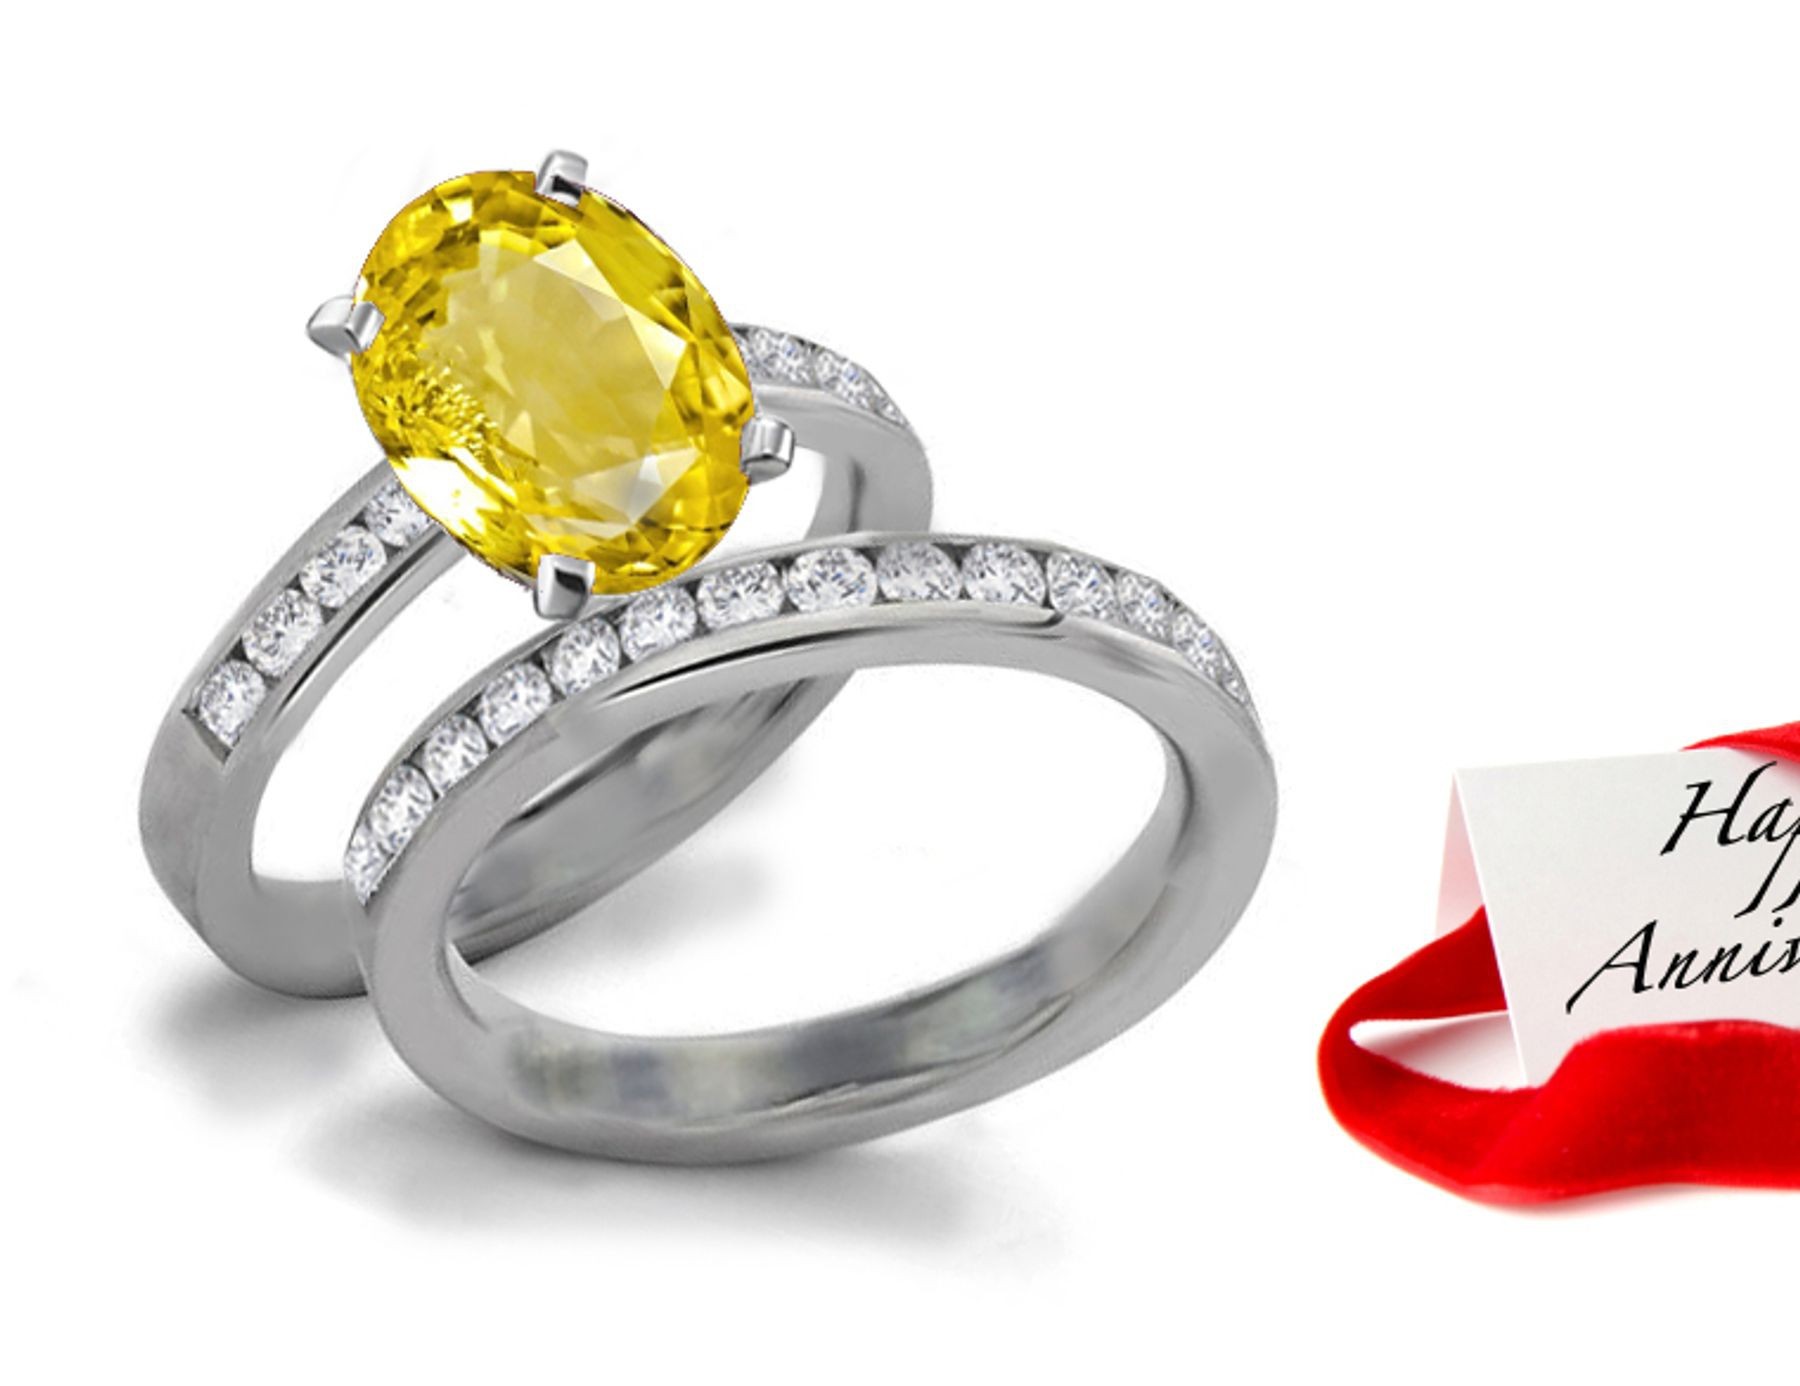 She'll Love: Brightest Rich Yellow Sapphire & Diamond Engagement & Wedding Bands